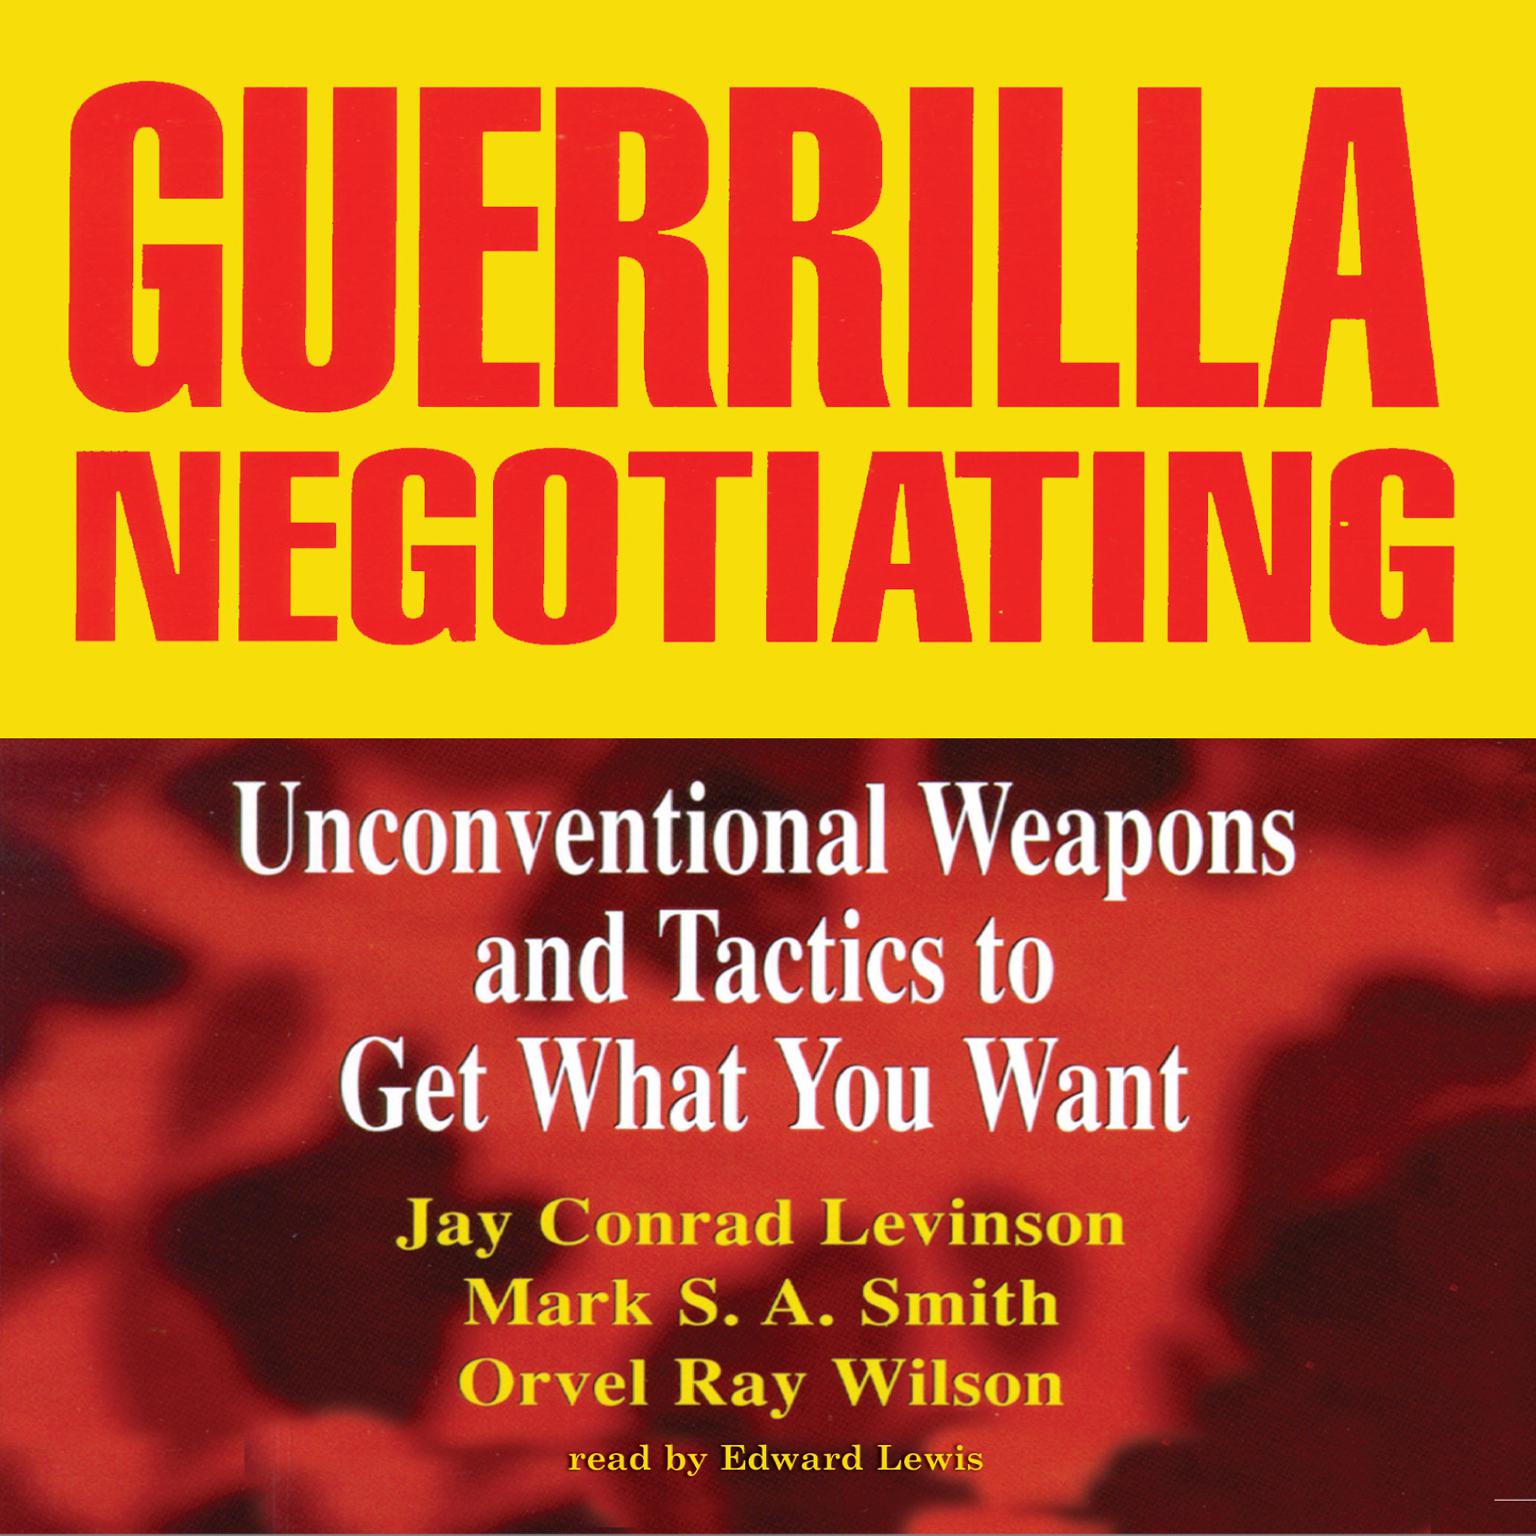 Guerrilla Negotiating: Unconventional Weapons and Tactics to Get What You Want Audiobook, by Jay Conrad Levinson